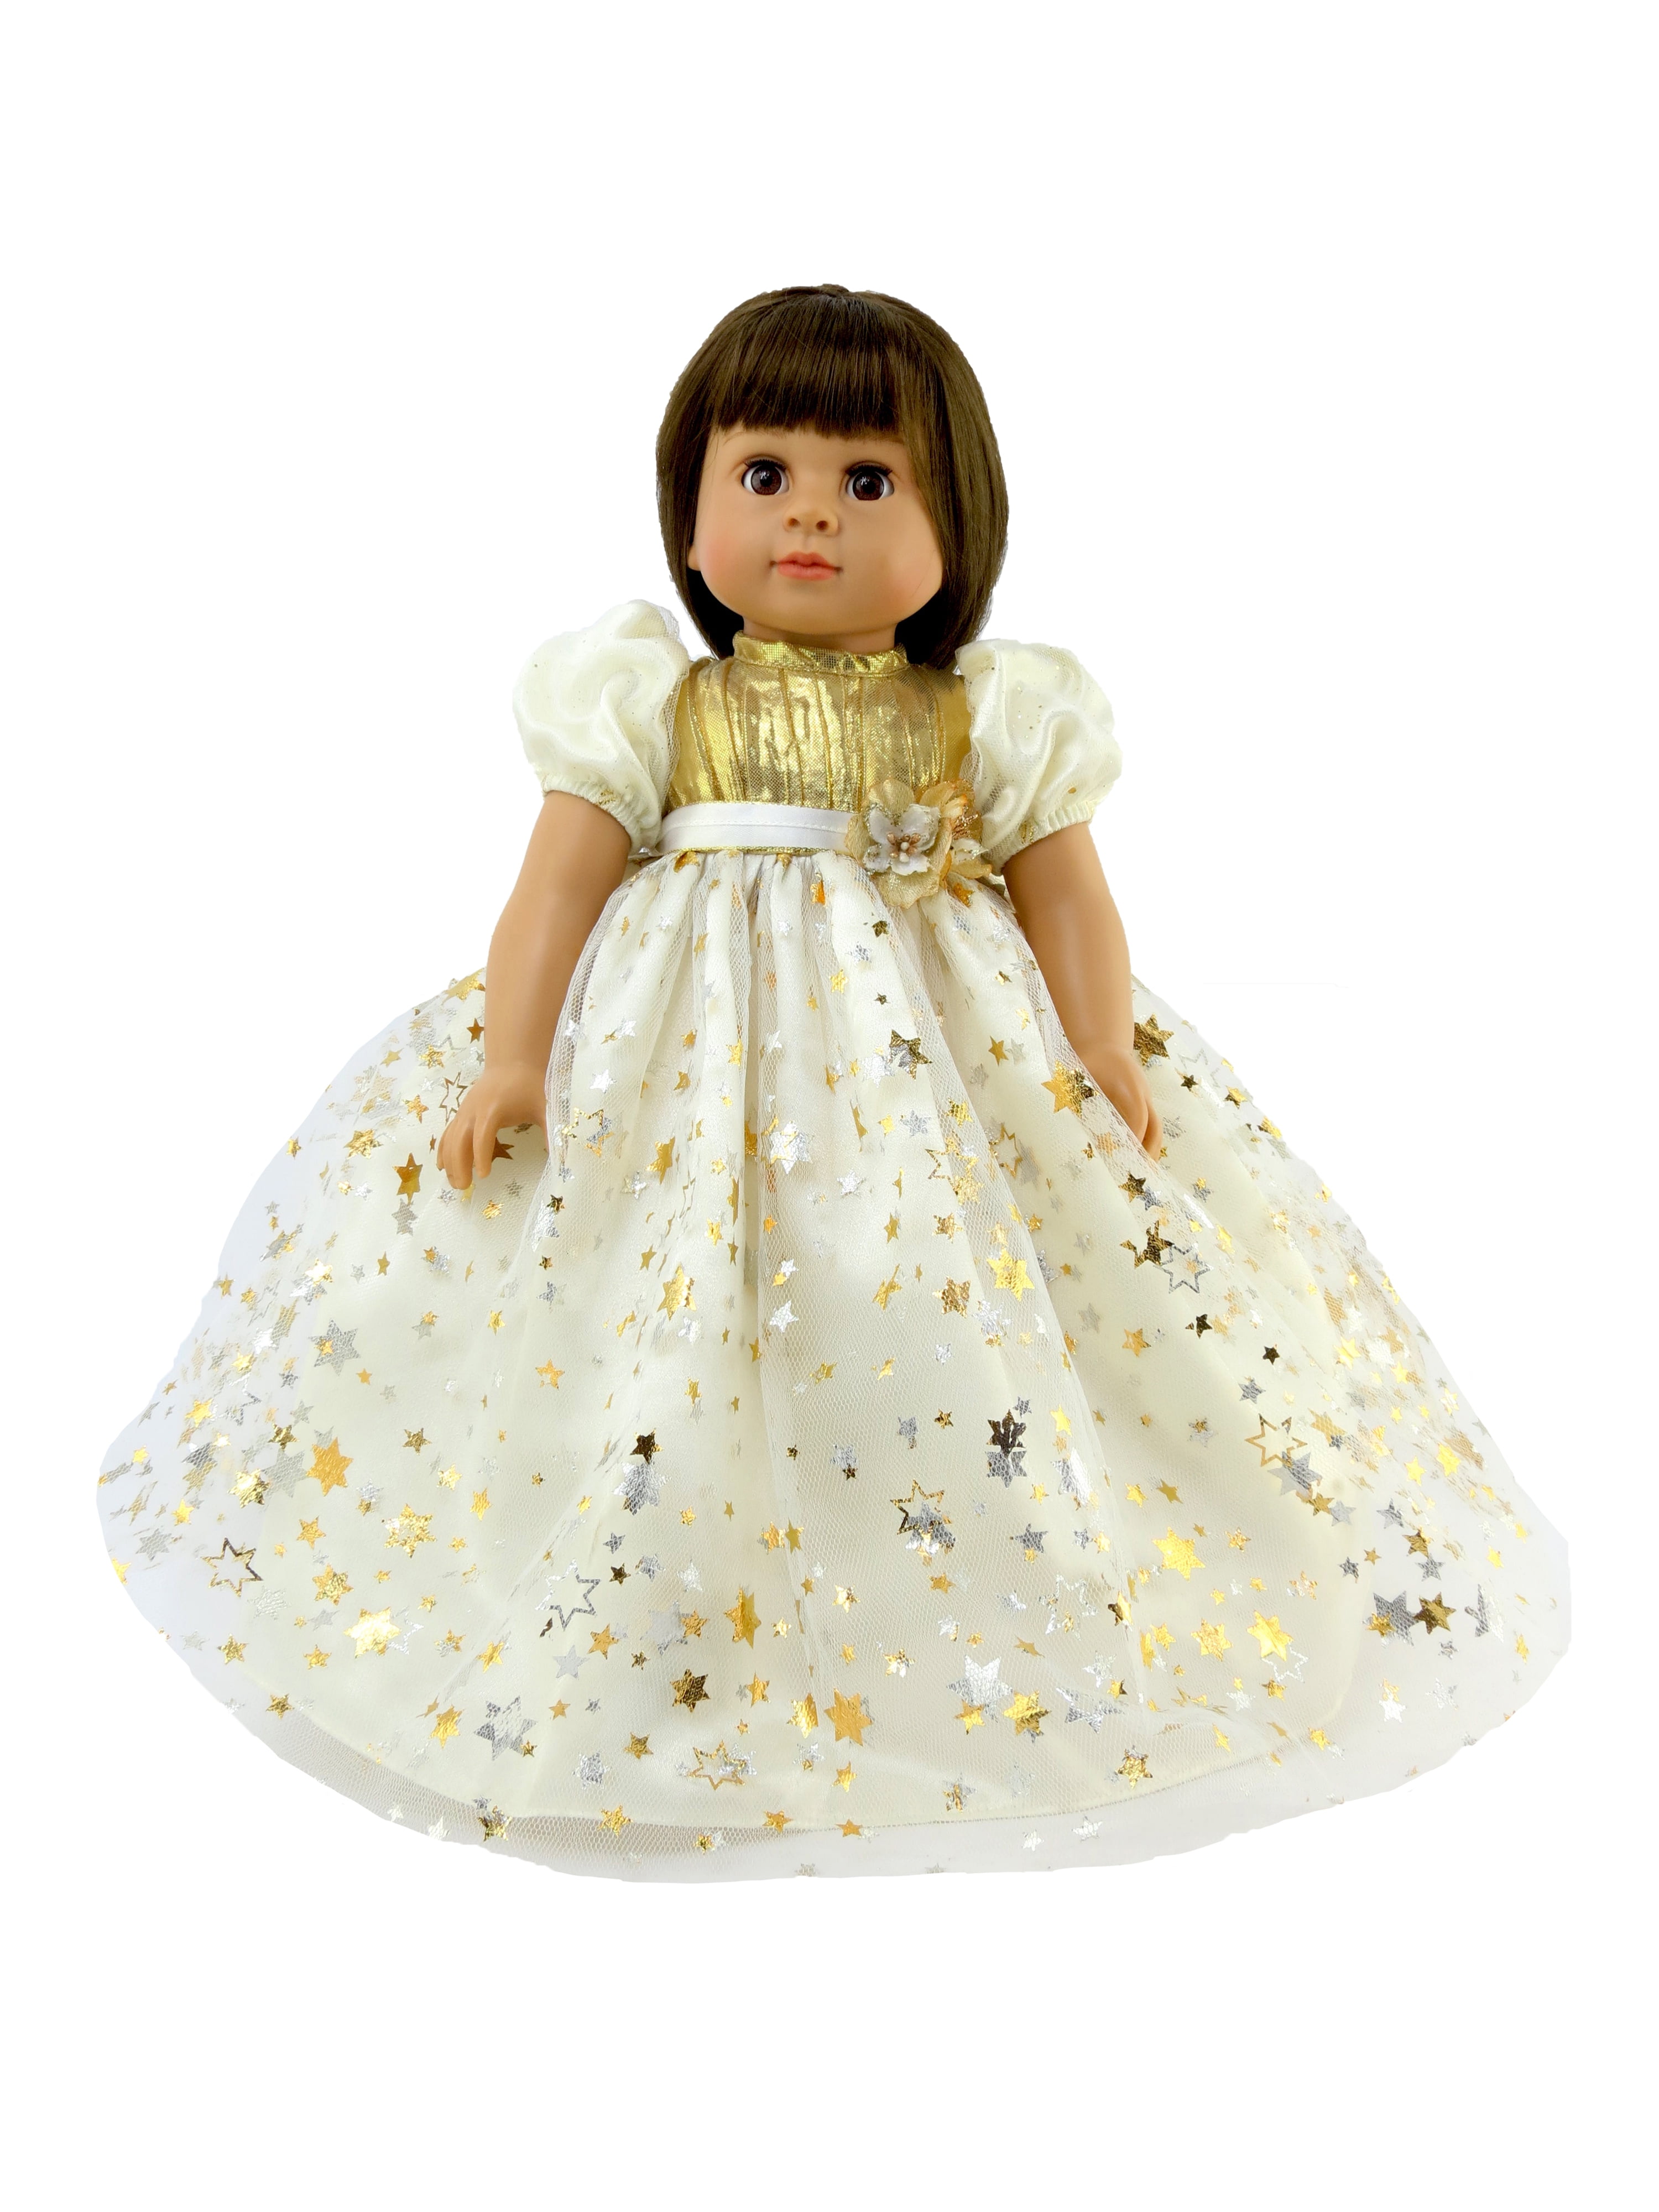 A Beautiful Multi Colored Ruffled Sundress Designed for 18 Inch Doll Like the Am 